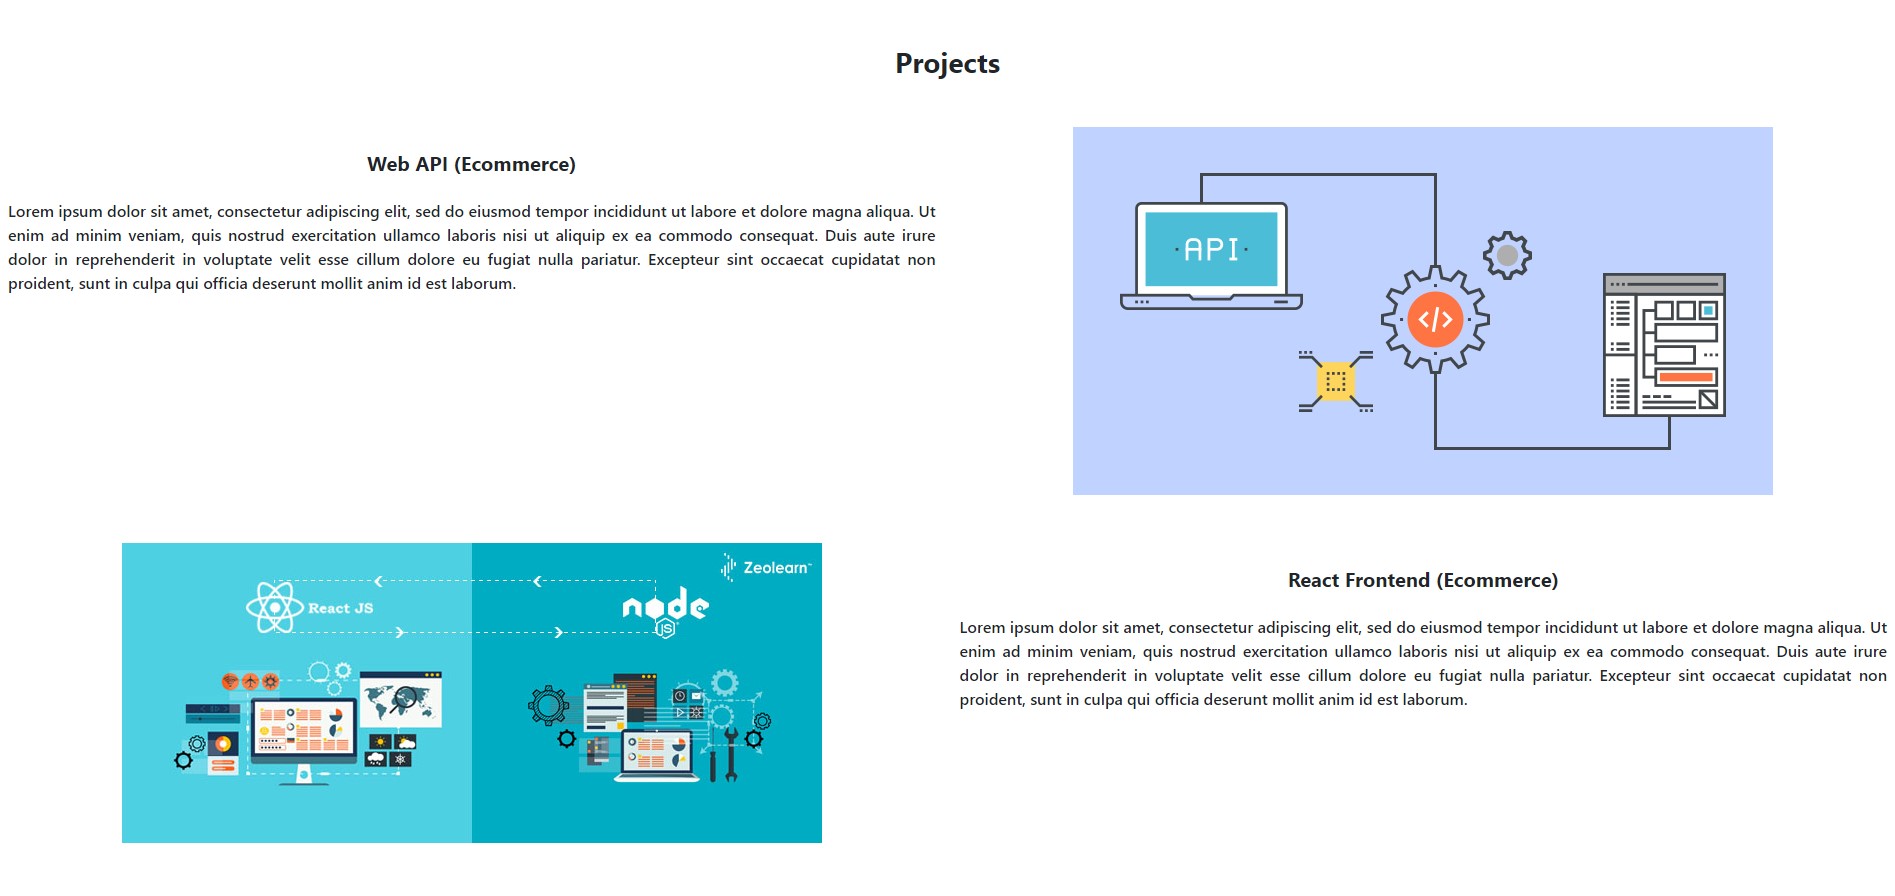 My Projects and Activities Snapshots